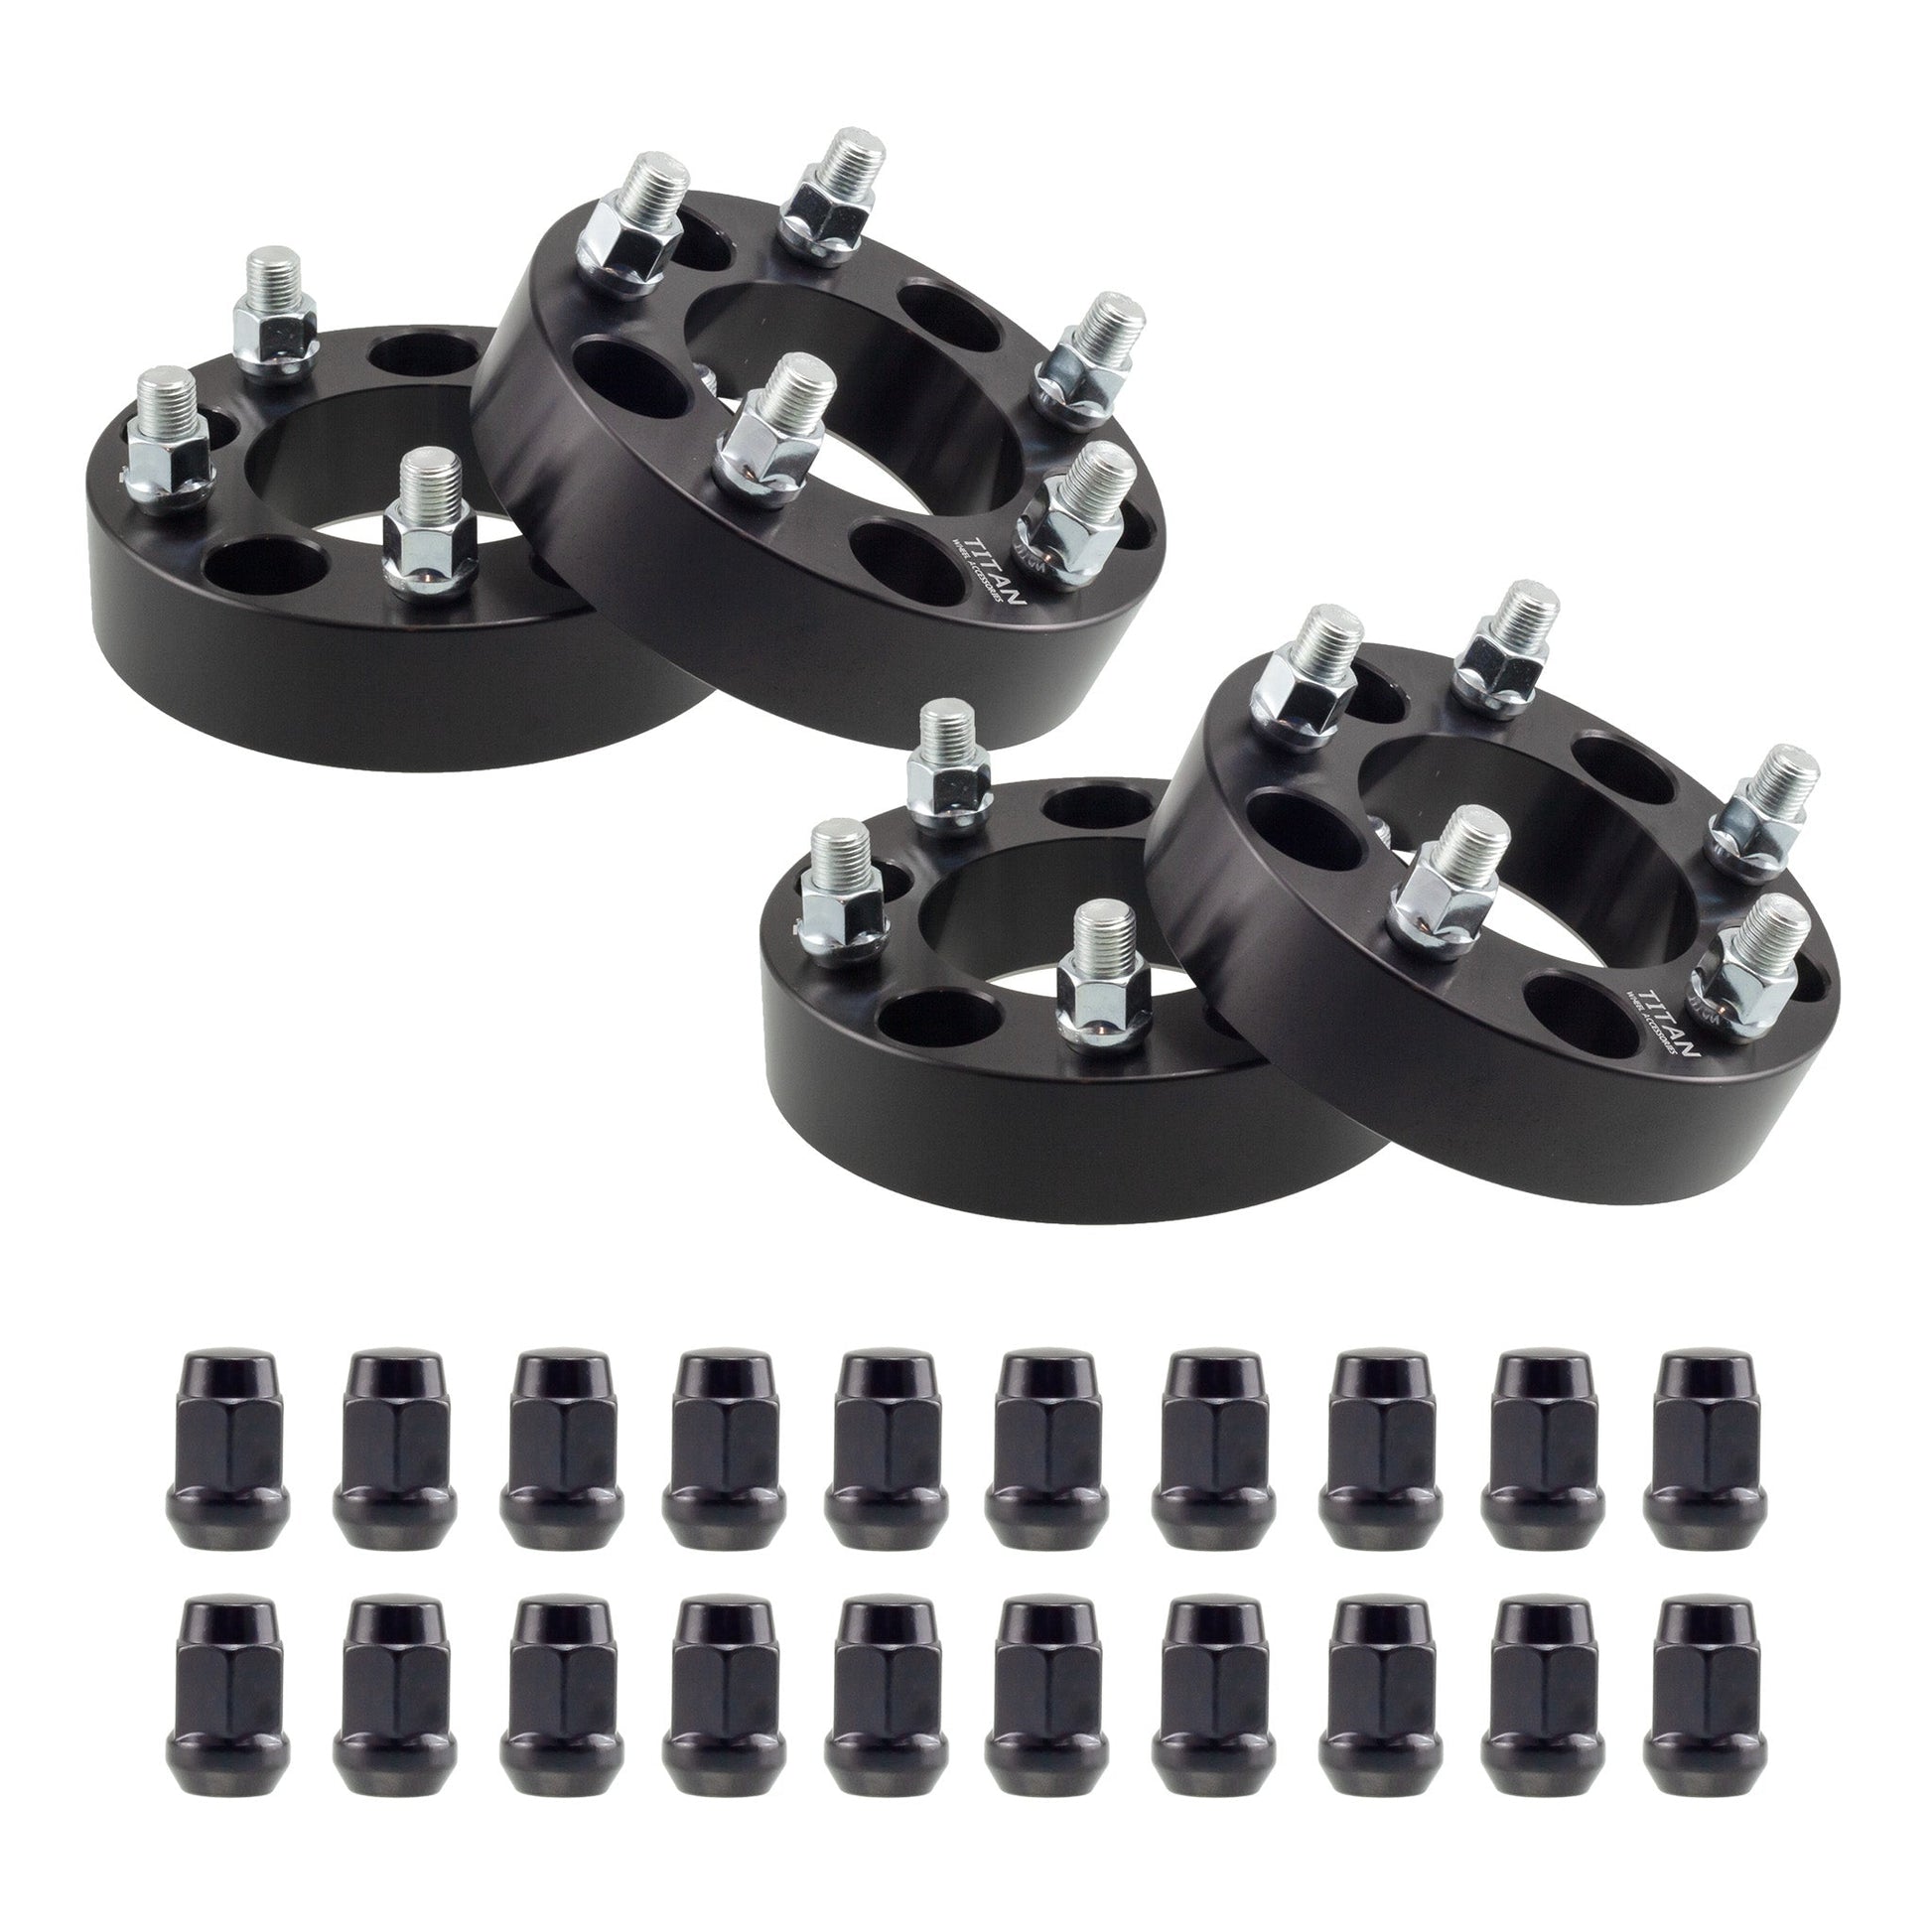 38mm (1.5") Titan Wheel Spacers for Toyota Camry MR2 Lexus IS | 5x114.3 (5x4.5) | 60.1 Hubcentric |12x1.5 Studs | Titan Wheel Accessories